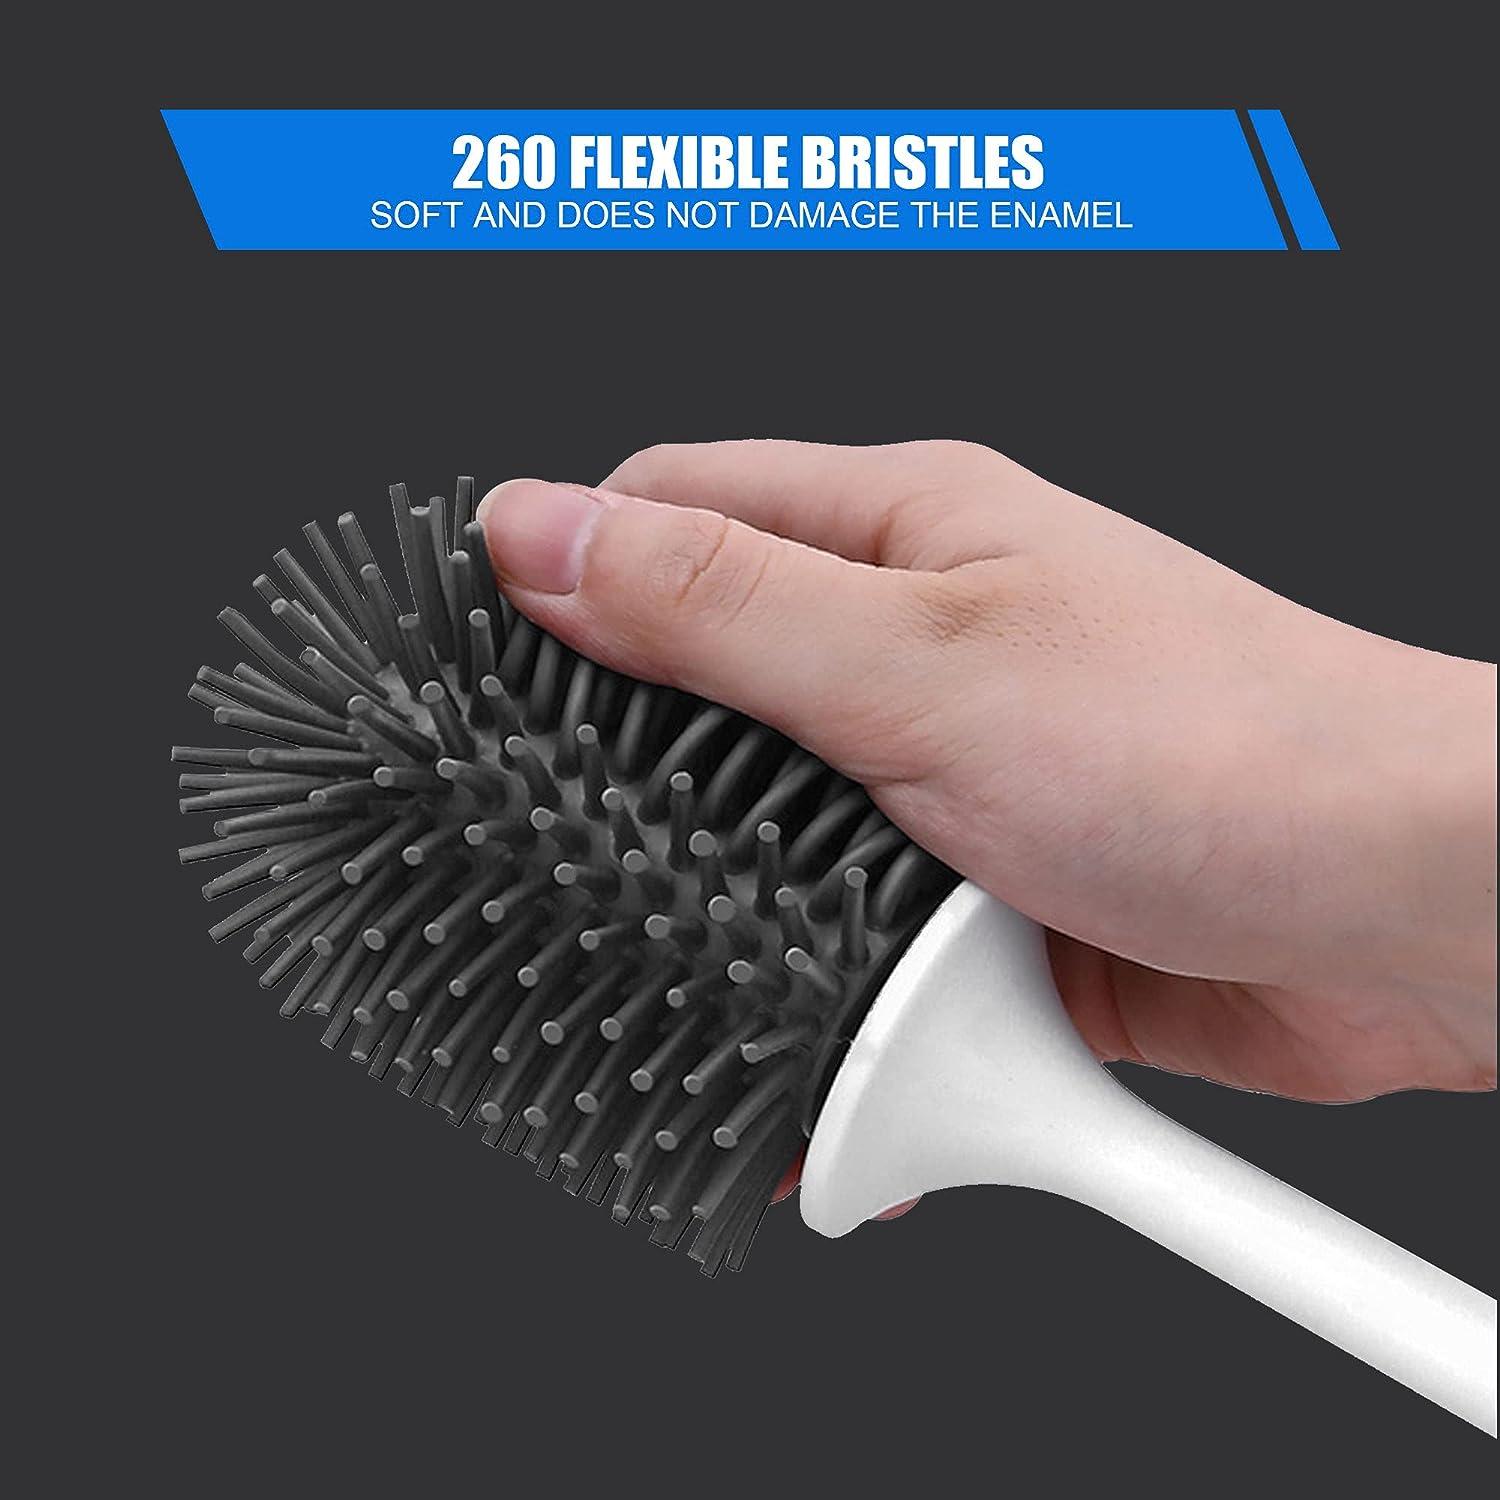 Bathroom Cleaning Tool Plastic Toilet Brush with Holder - China